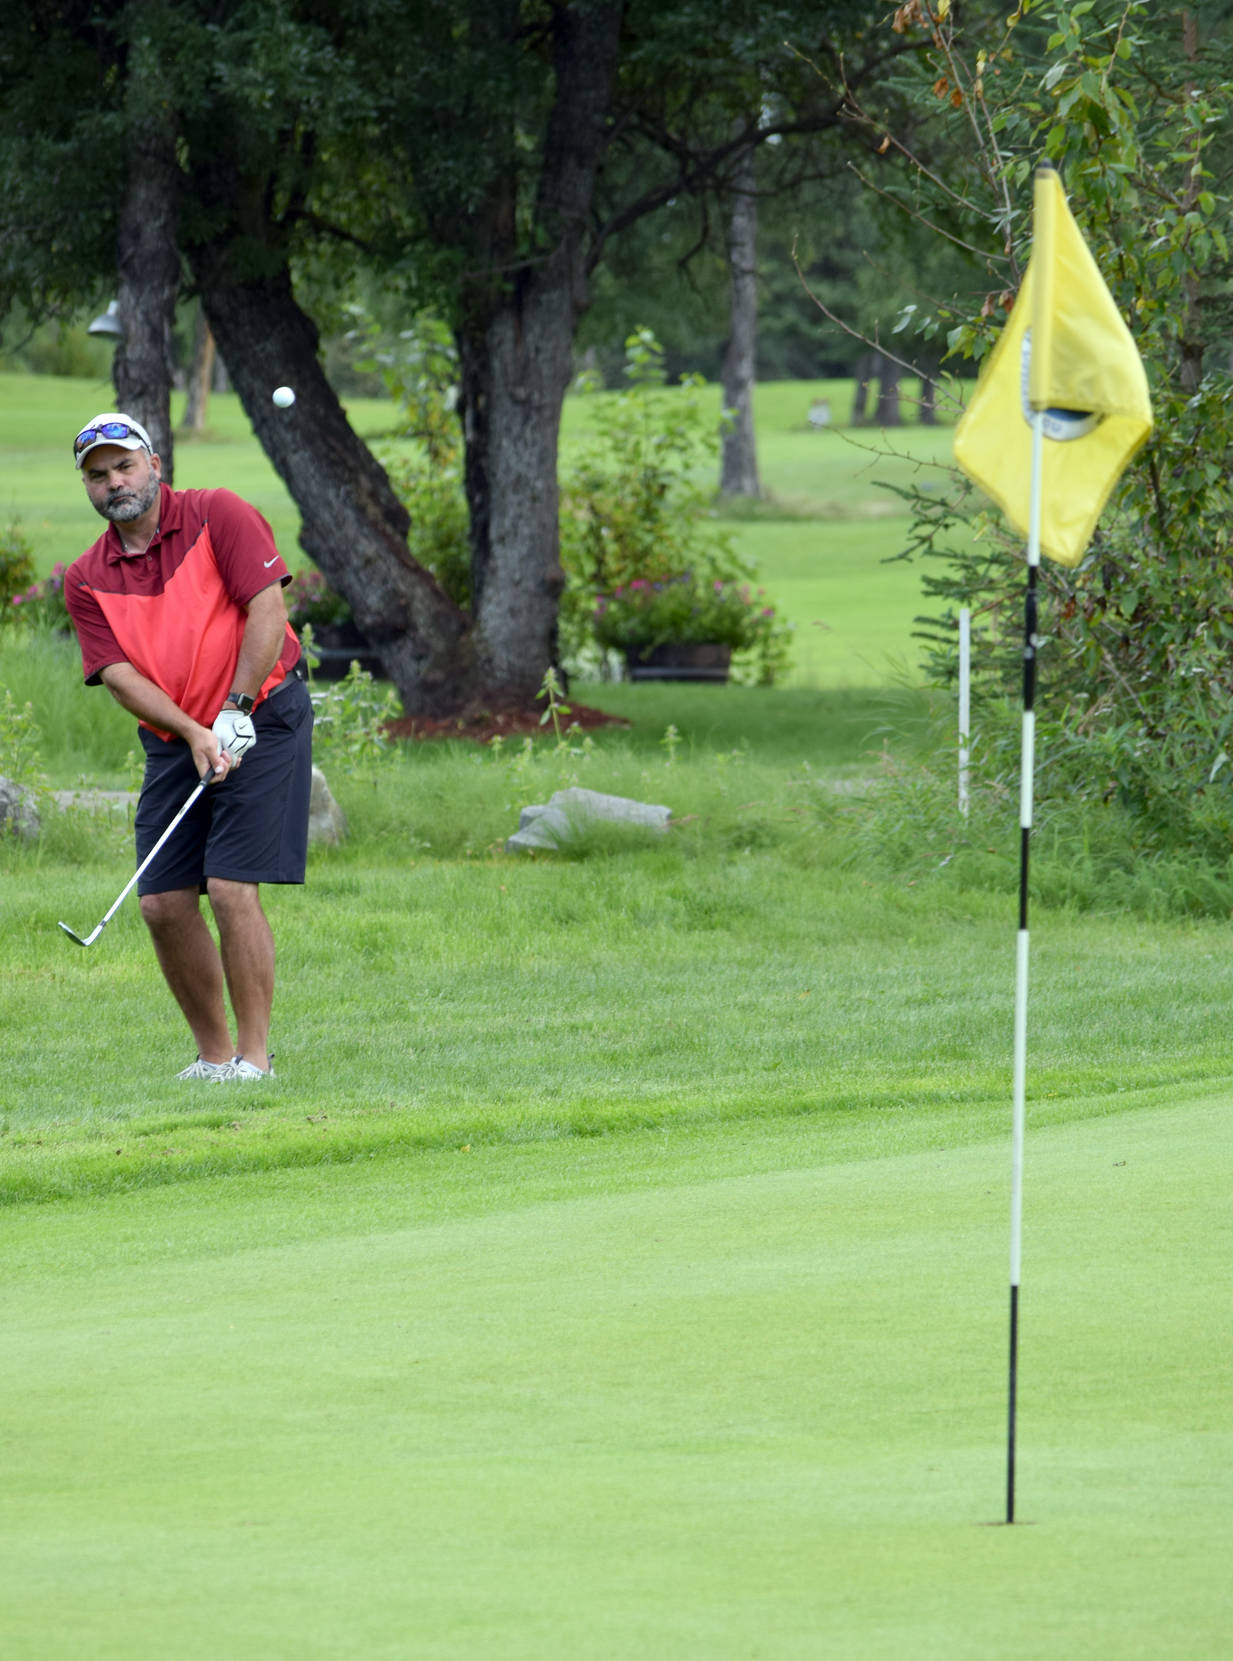 Palmer Golf Course pro Rob Nelson chips to the 18th green during a second playoff hole at the Kenai Peninsula Open on Sunday, Aug. 27, 2017, at Birch Ridge Golf Course. Nelson would birdie the hole to win the tournament. (Photo by Jeff Helminiak/Peninsula Clarion)